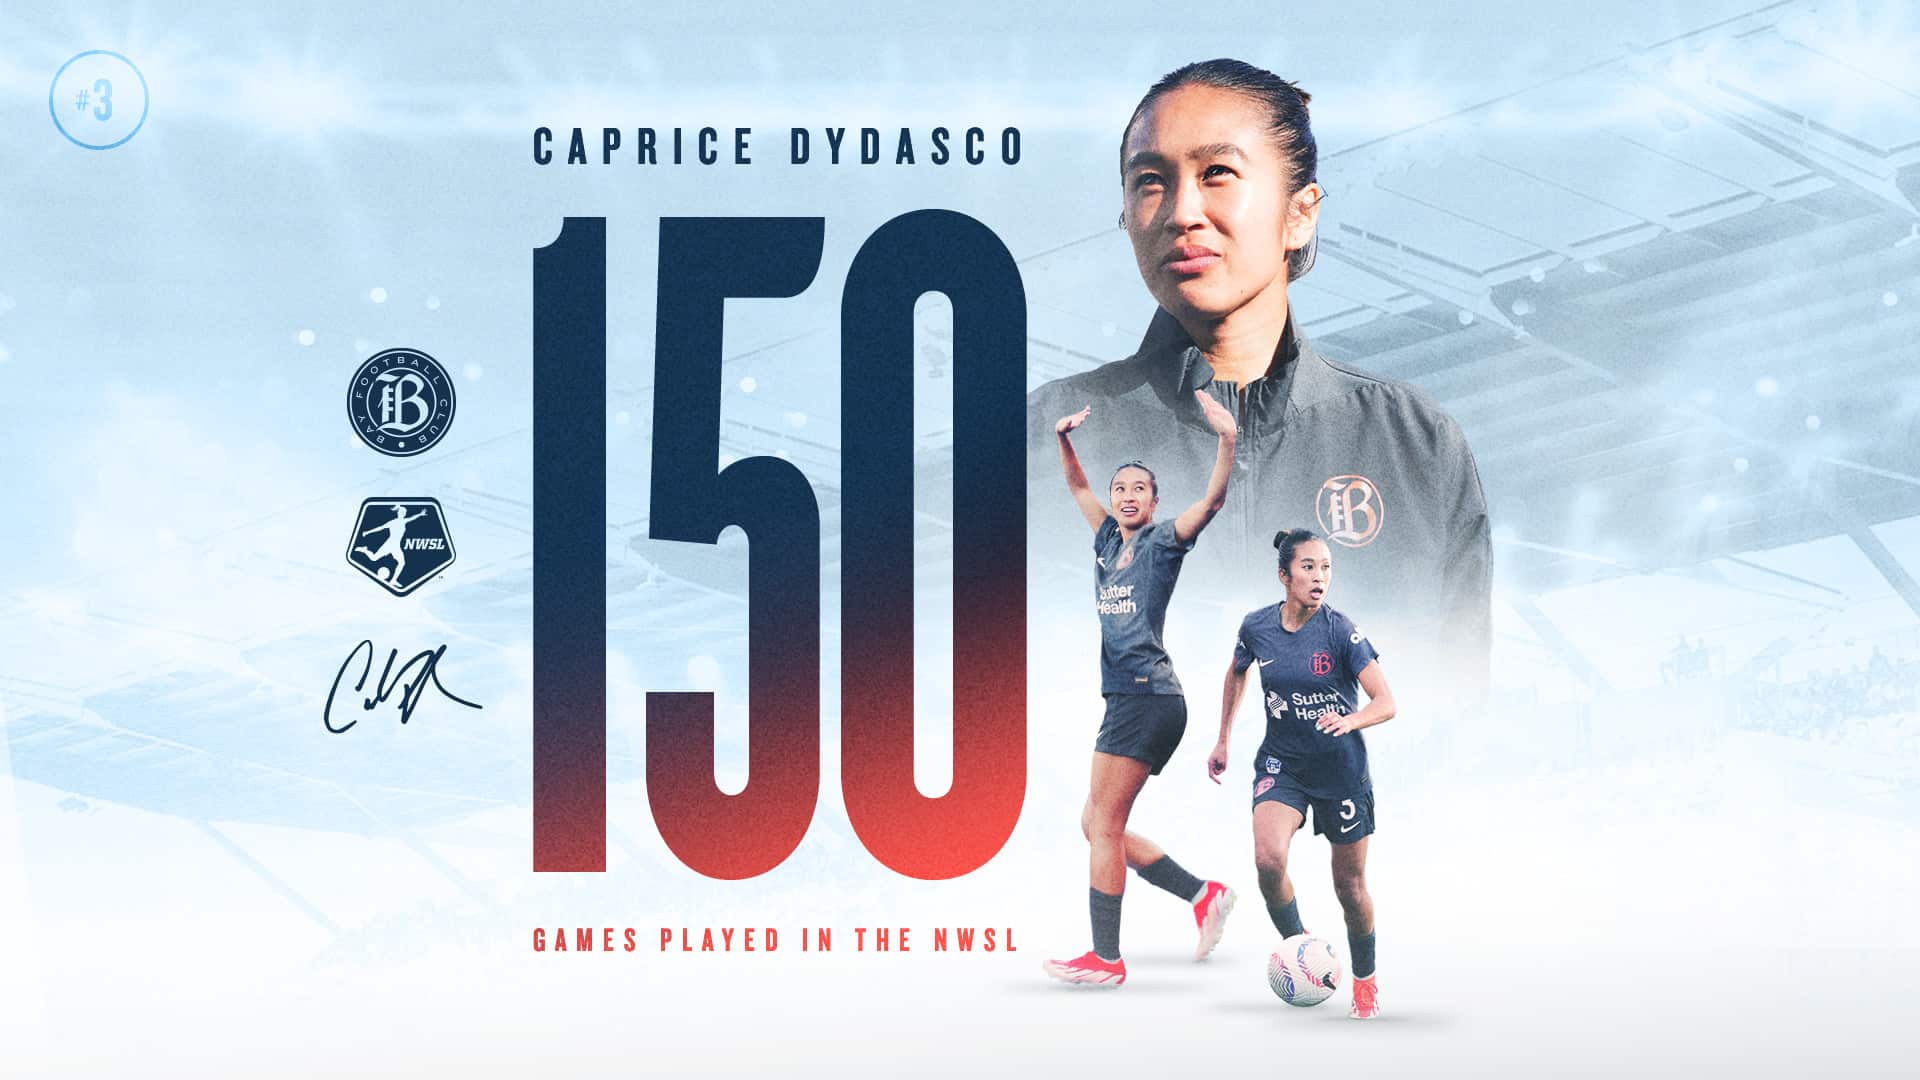 Caprice Dydasco 150 matches played in the NWSL